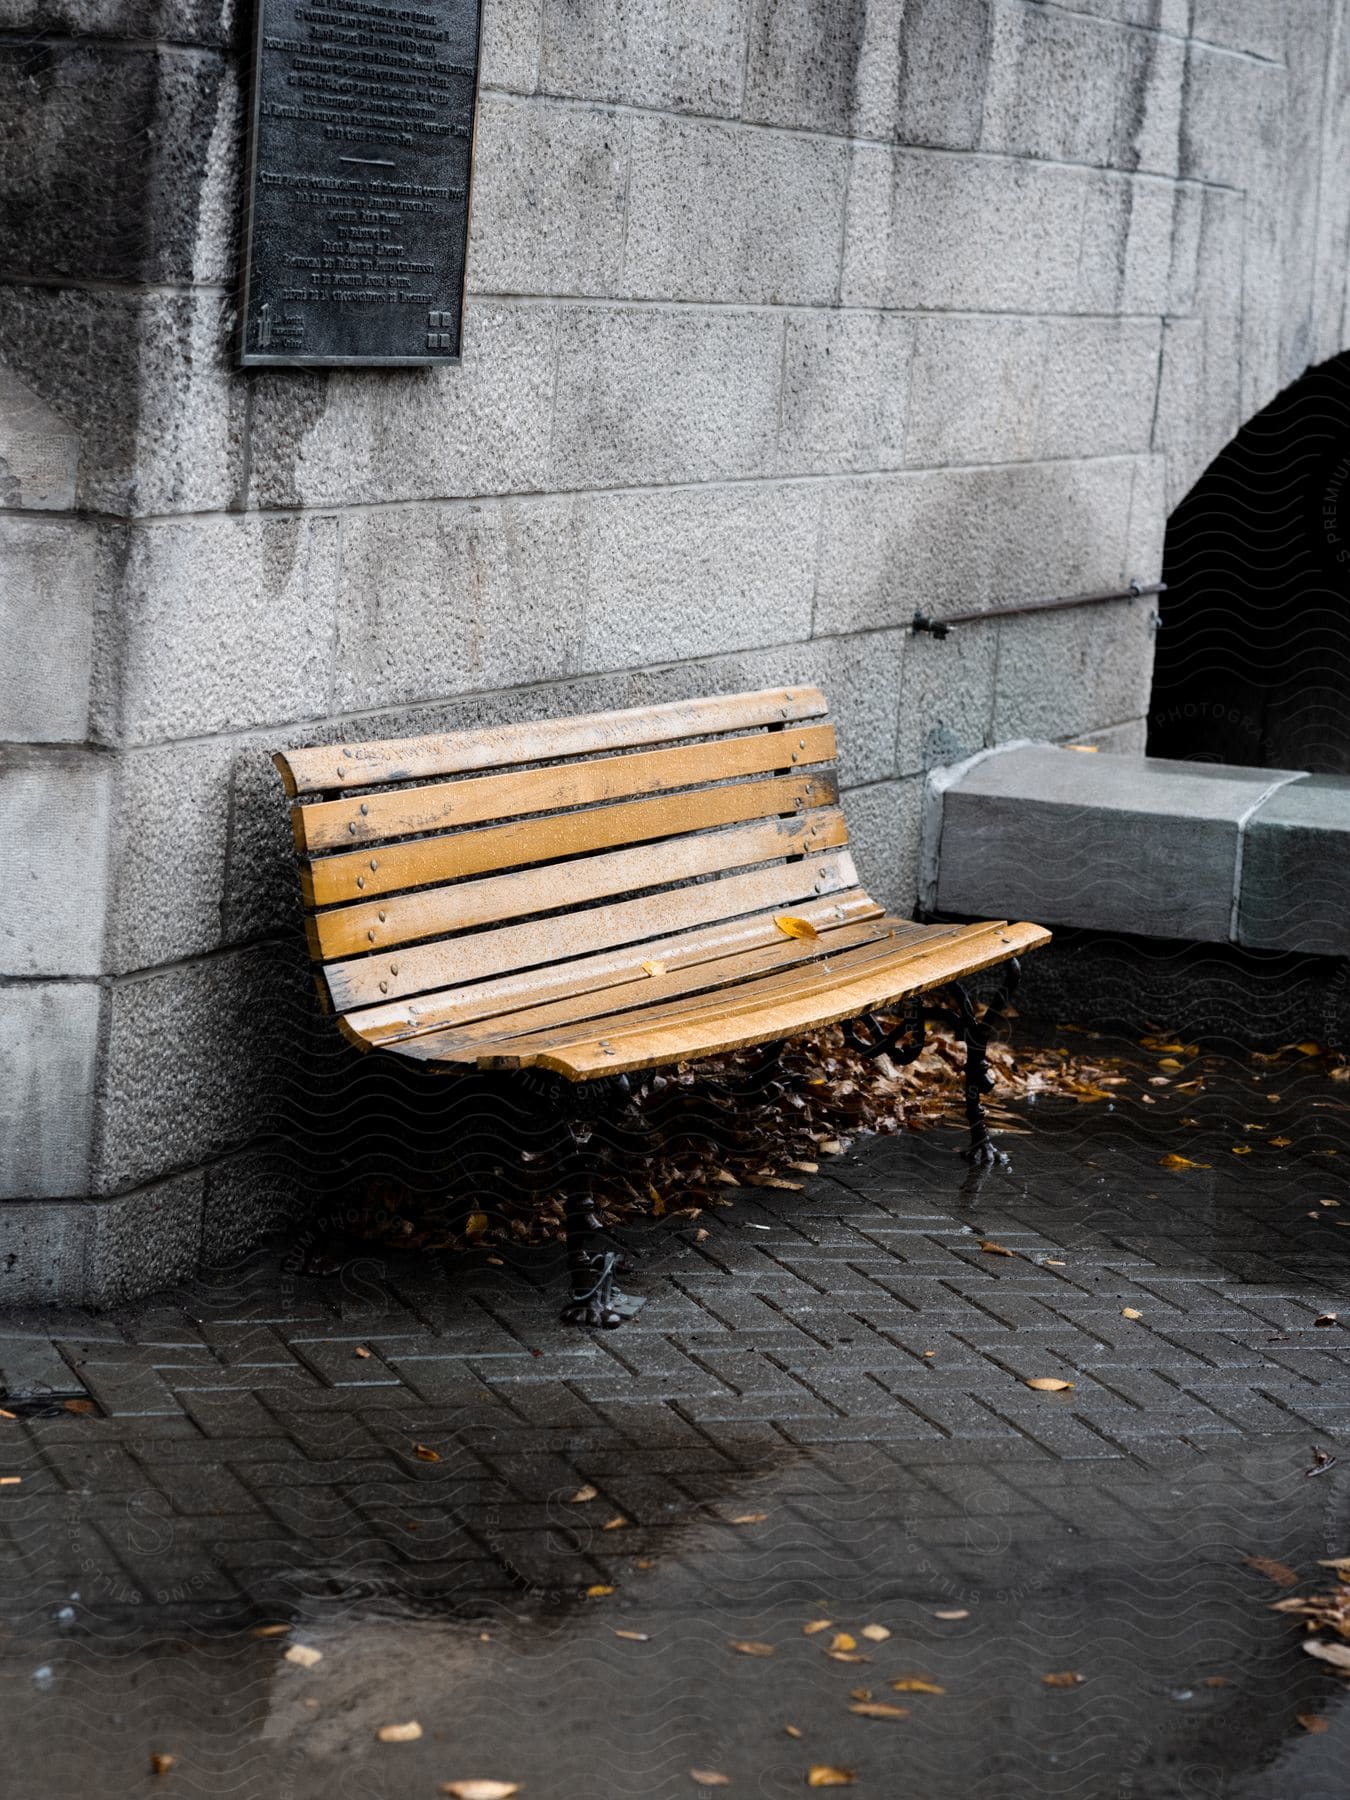 A weathered wooden bench sits on brick pavement by a leafy tunnel entrance, with a plaque and a puddle reflecting the colorful fall foliage.